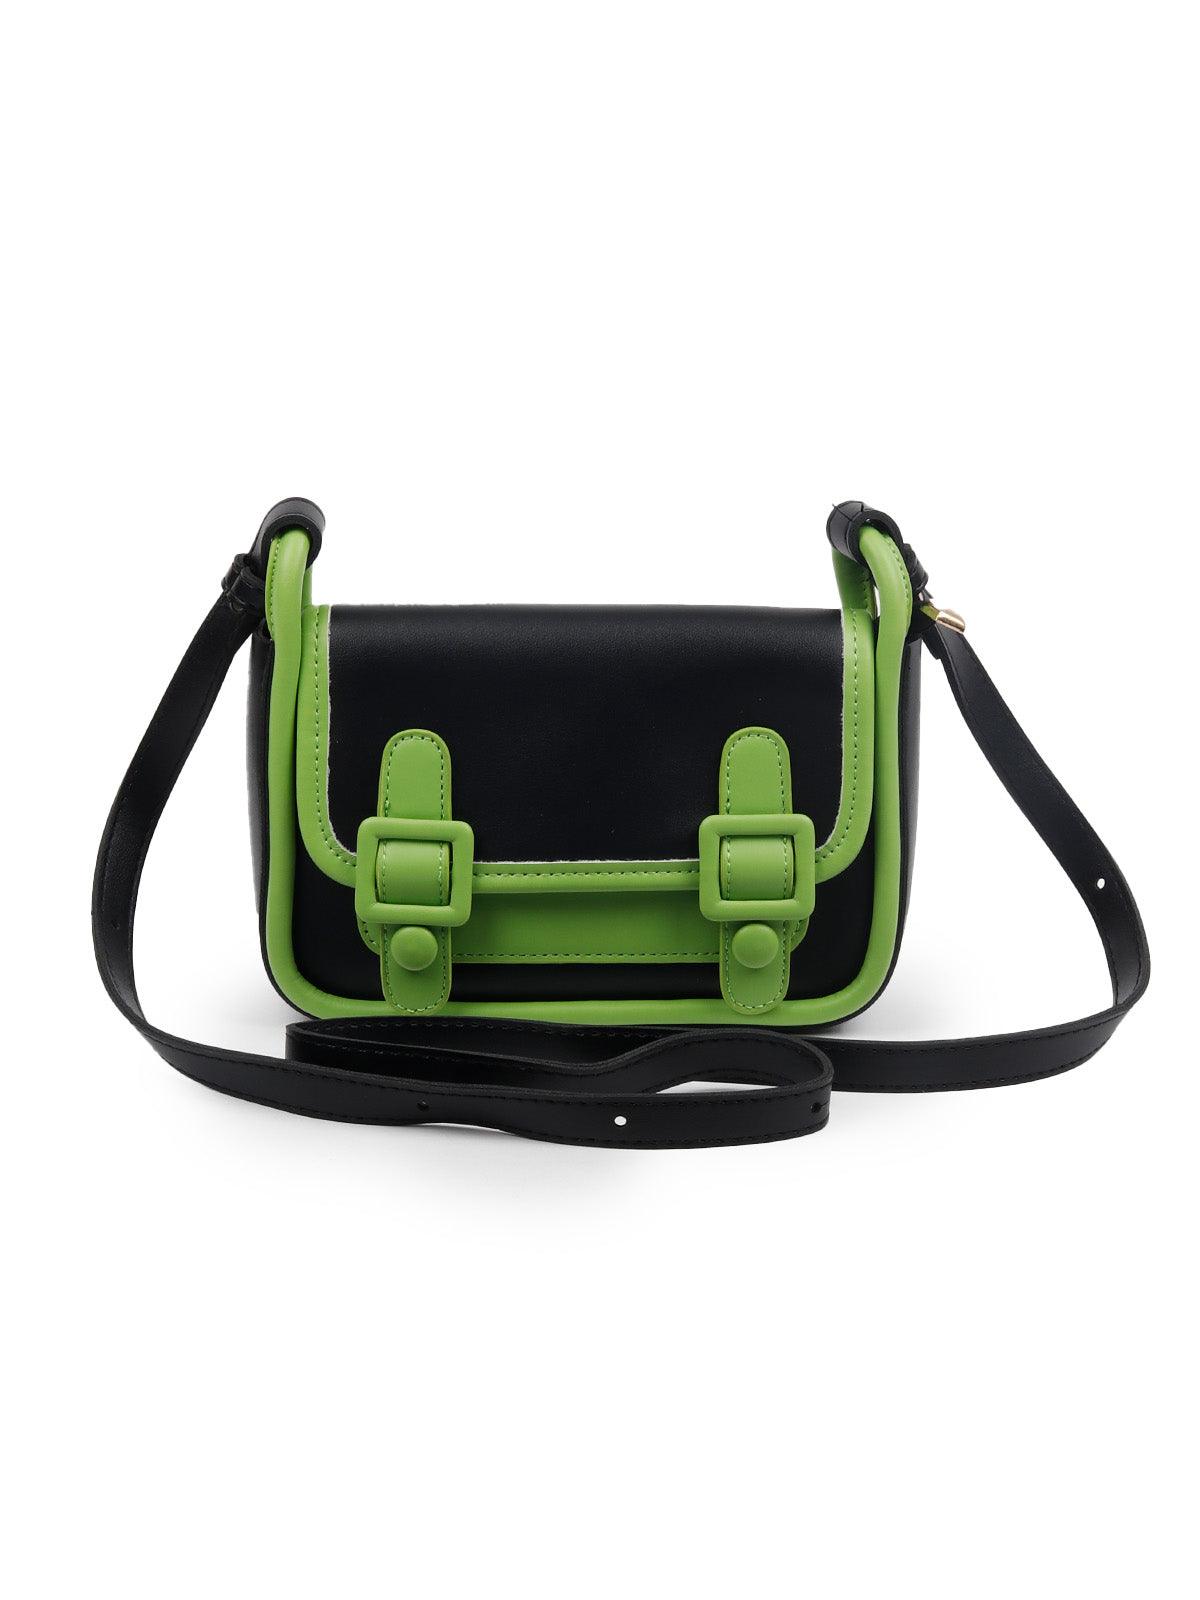 THE VERY SMART GREEN AND BLACK CLUTCH BAG - Odette